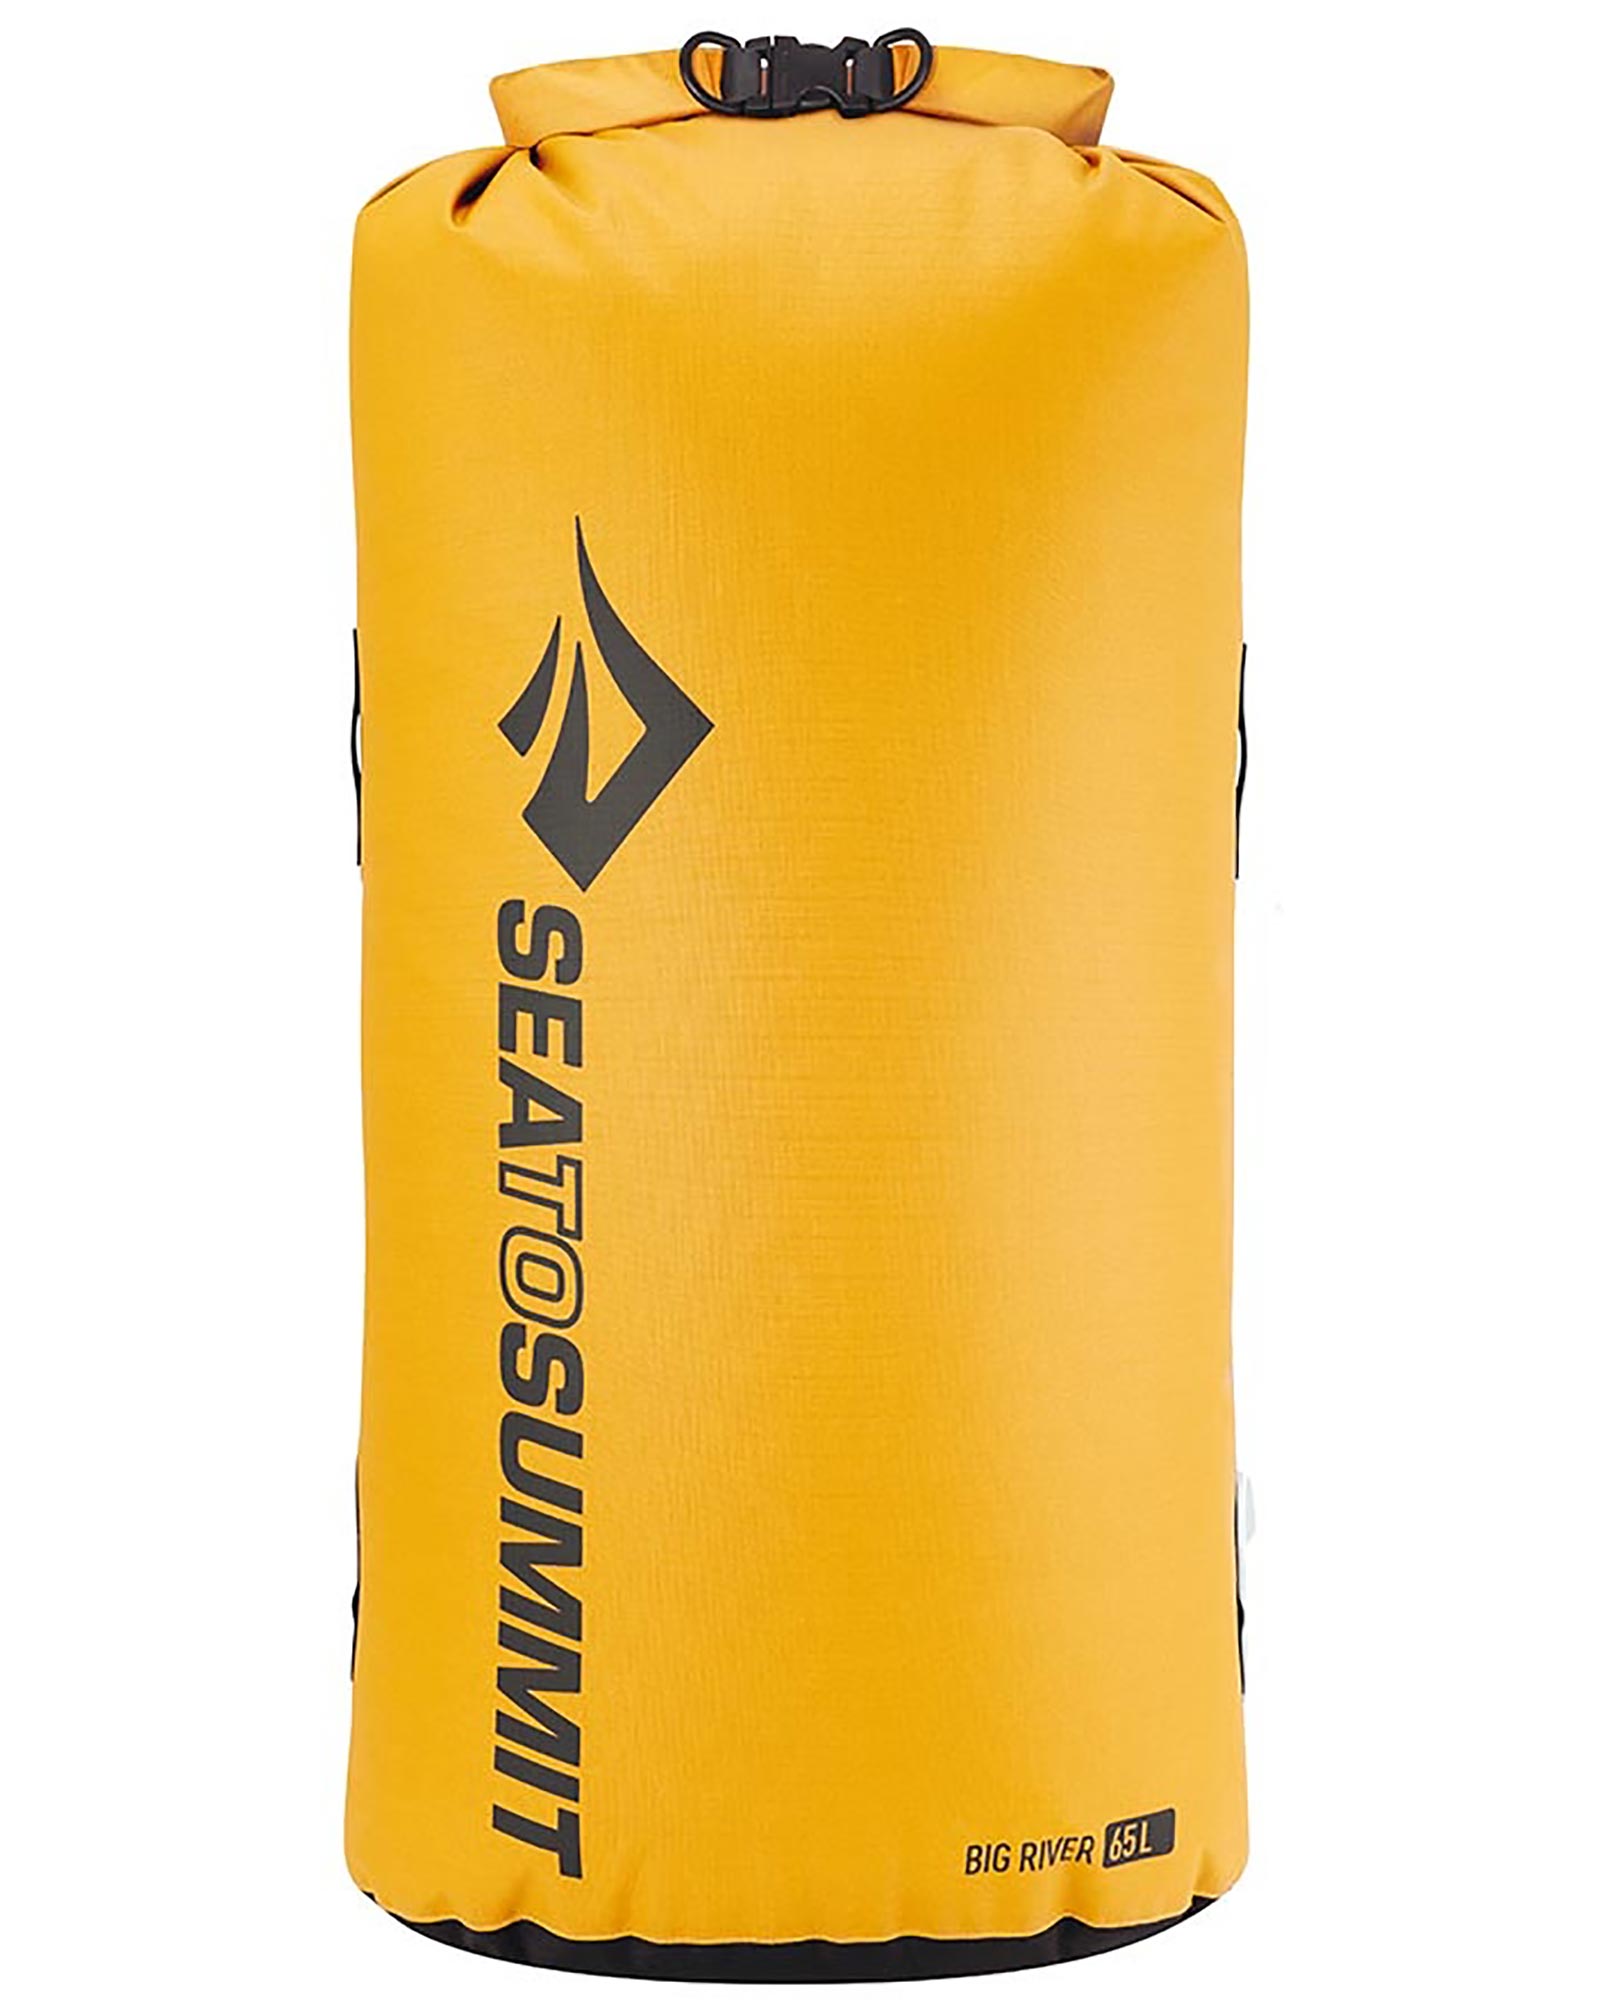 Product image of Sea to Summit Big River Dry Bag 65L